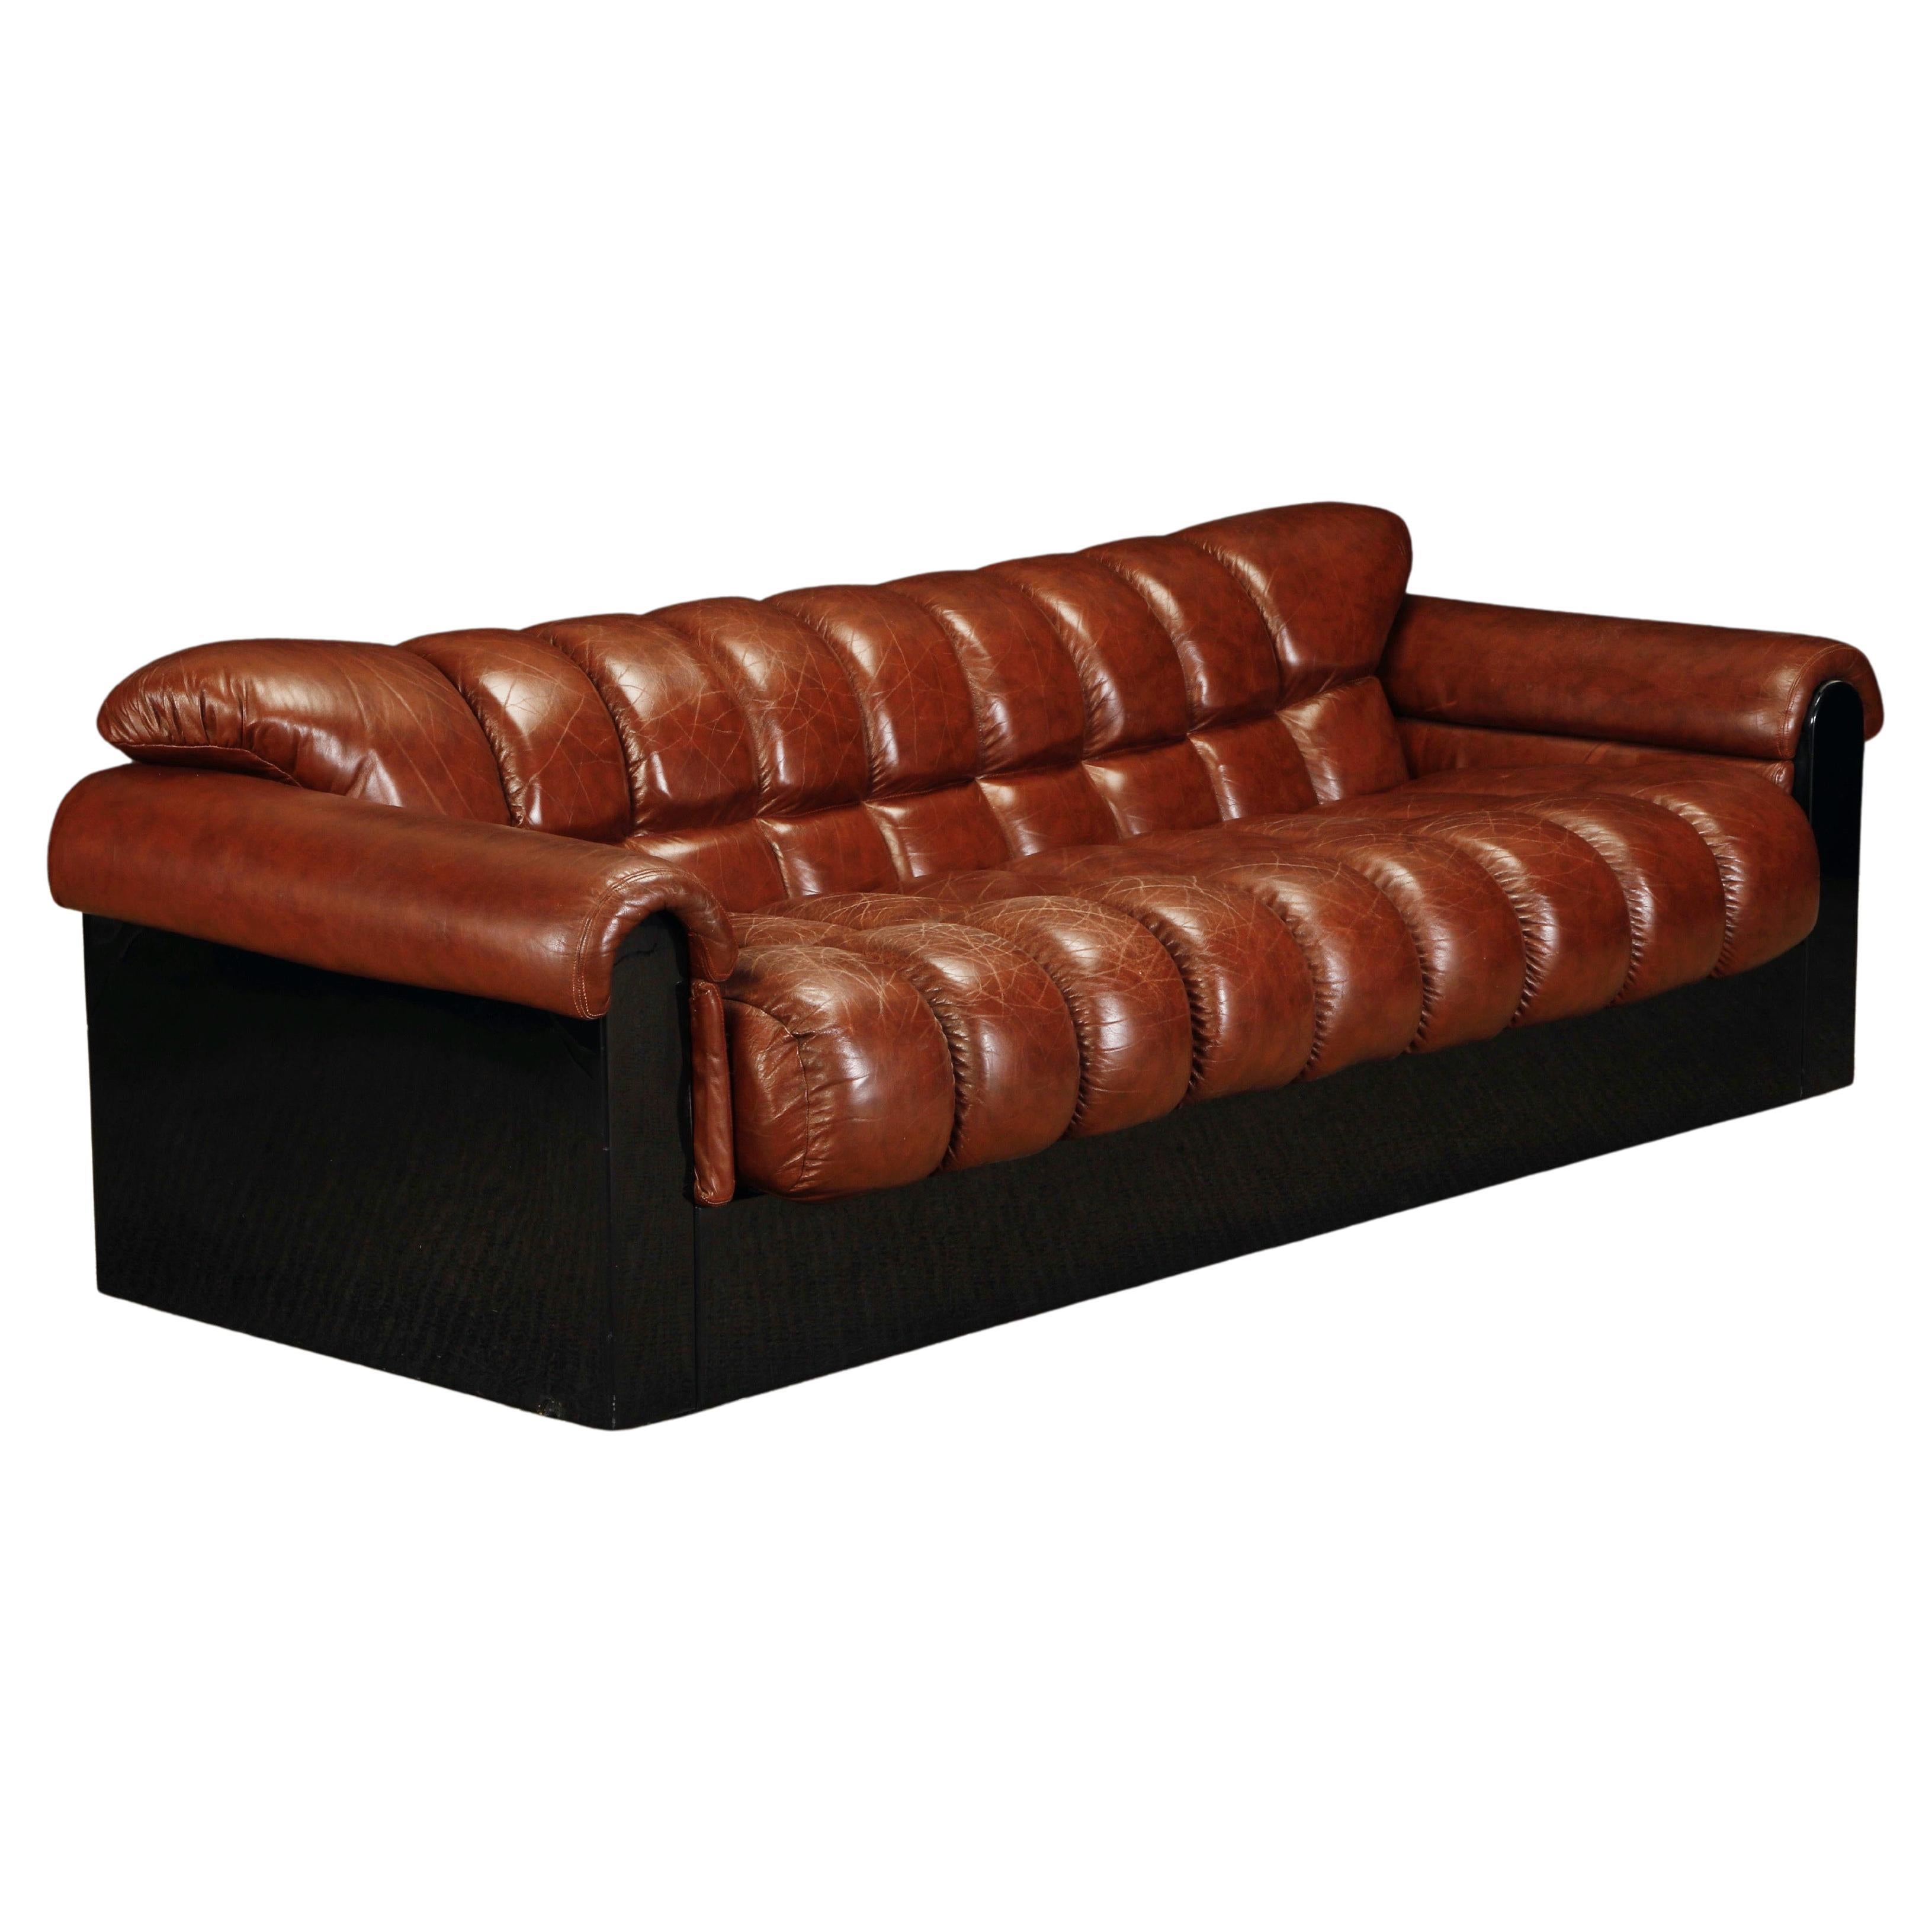 'Bounty' Leather Three-Seat Sofa by L. Davanzati for The Pace Collection, 1980s 